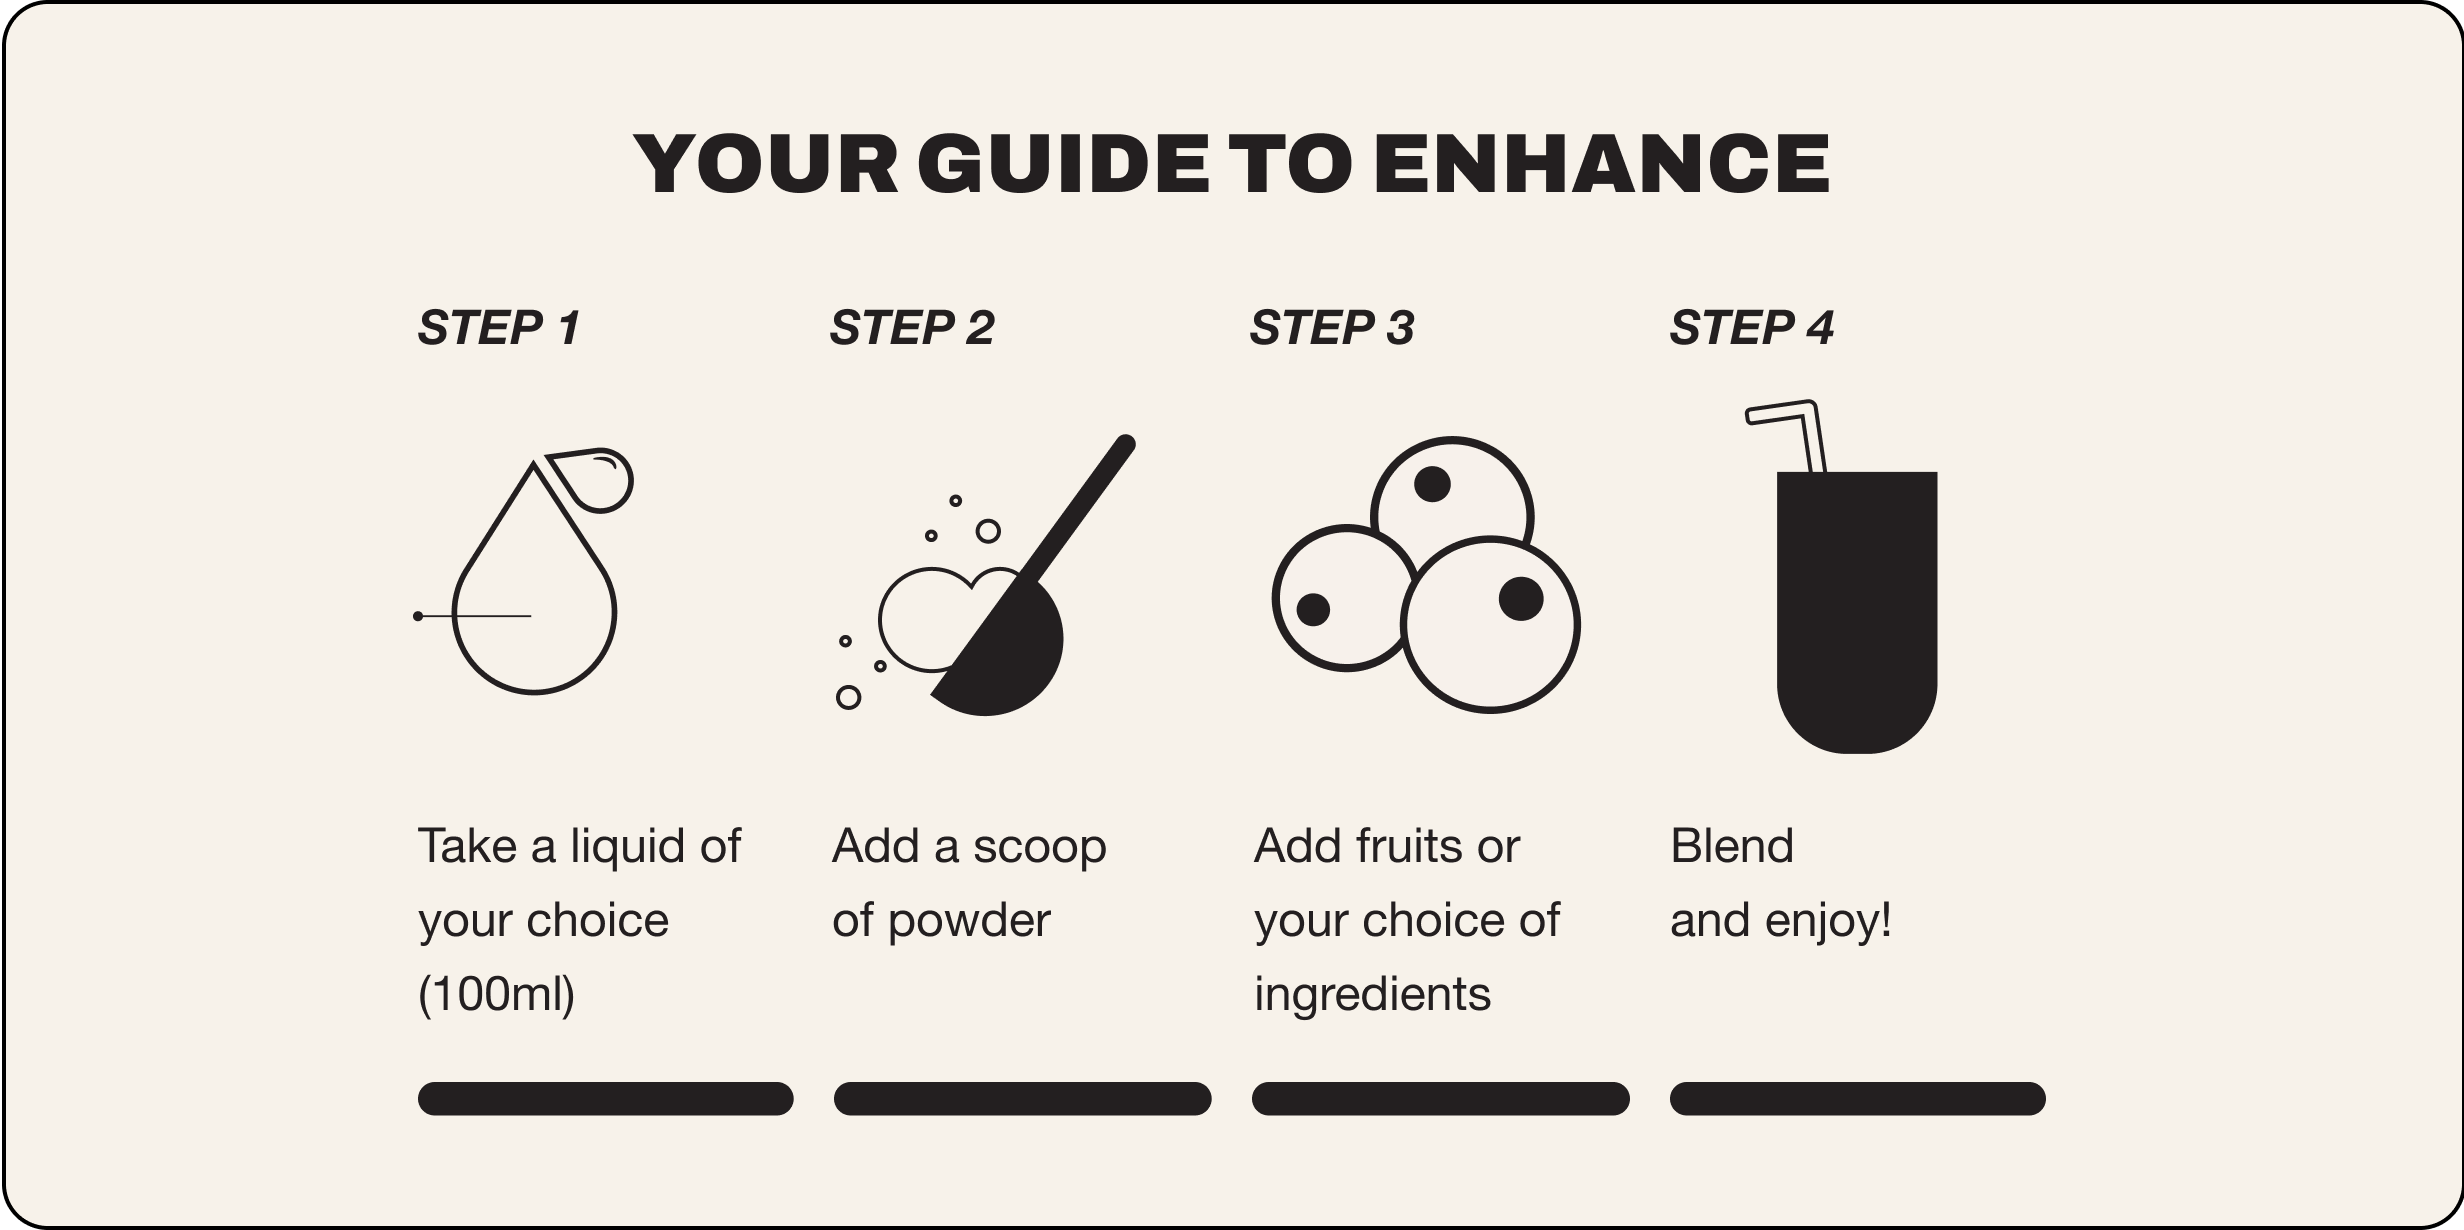 Your guide to enhance. Step 1 take a liquid of your choice 100ml, step 2 add a scoop of powder, step 3 add fruits or your choice of ingredients, step 4 blend and enjoy!